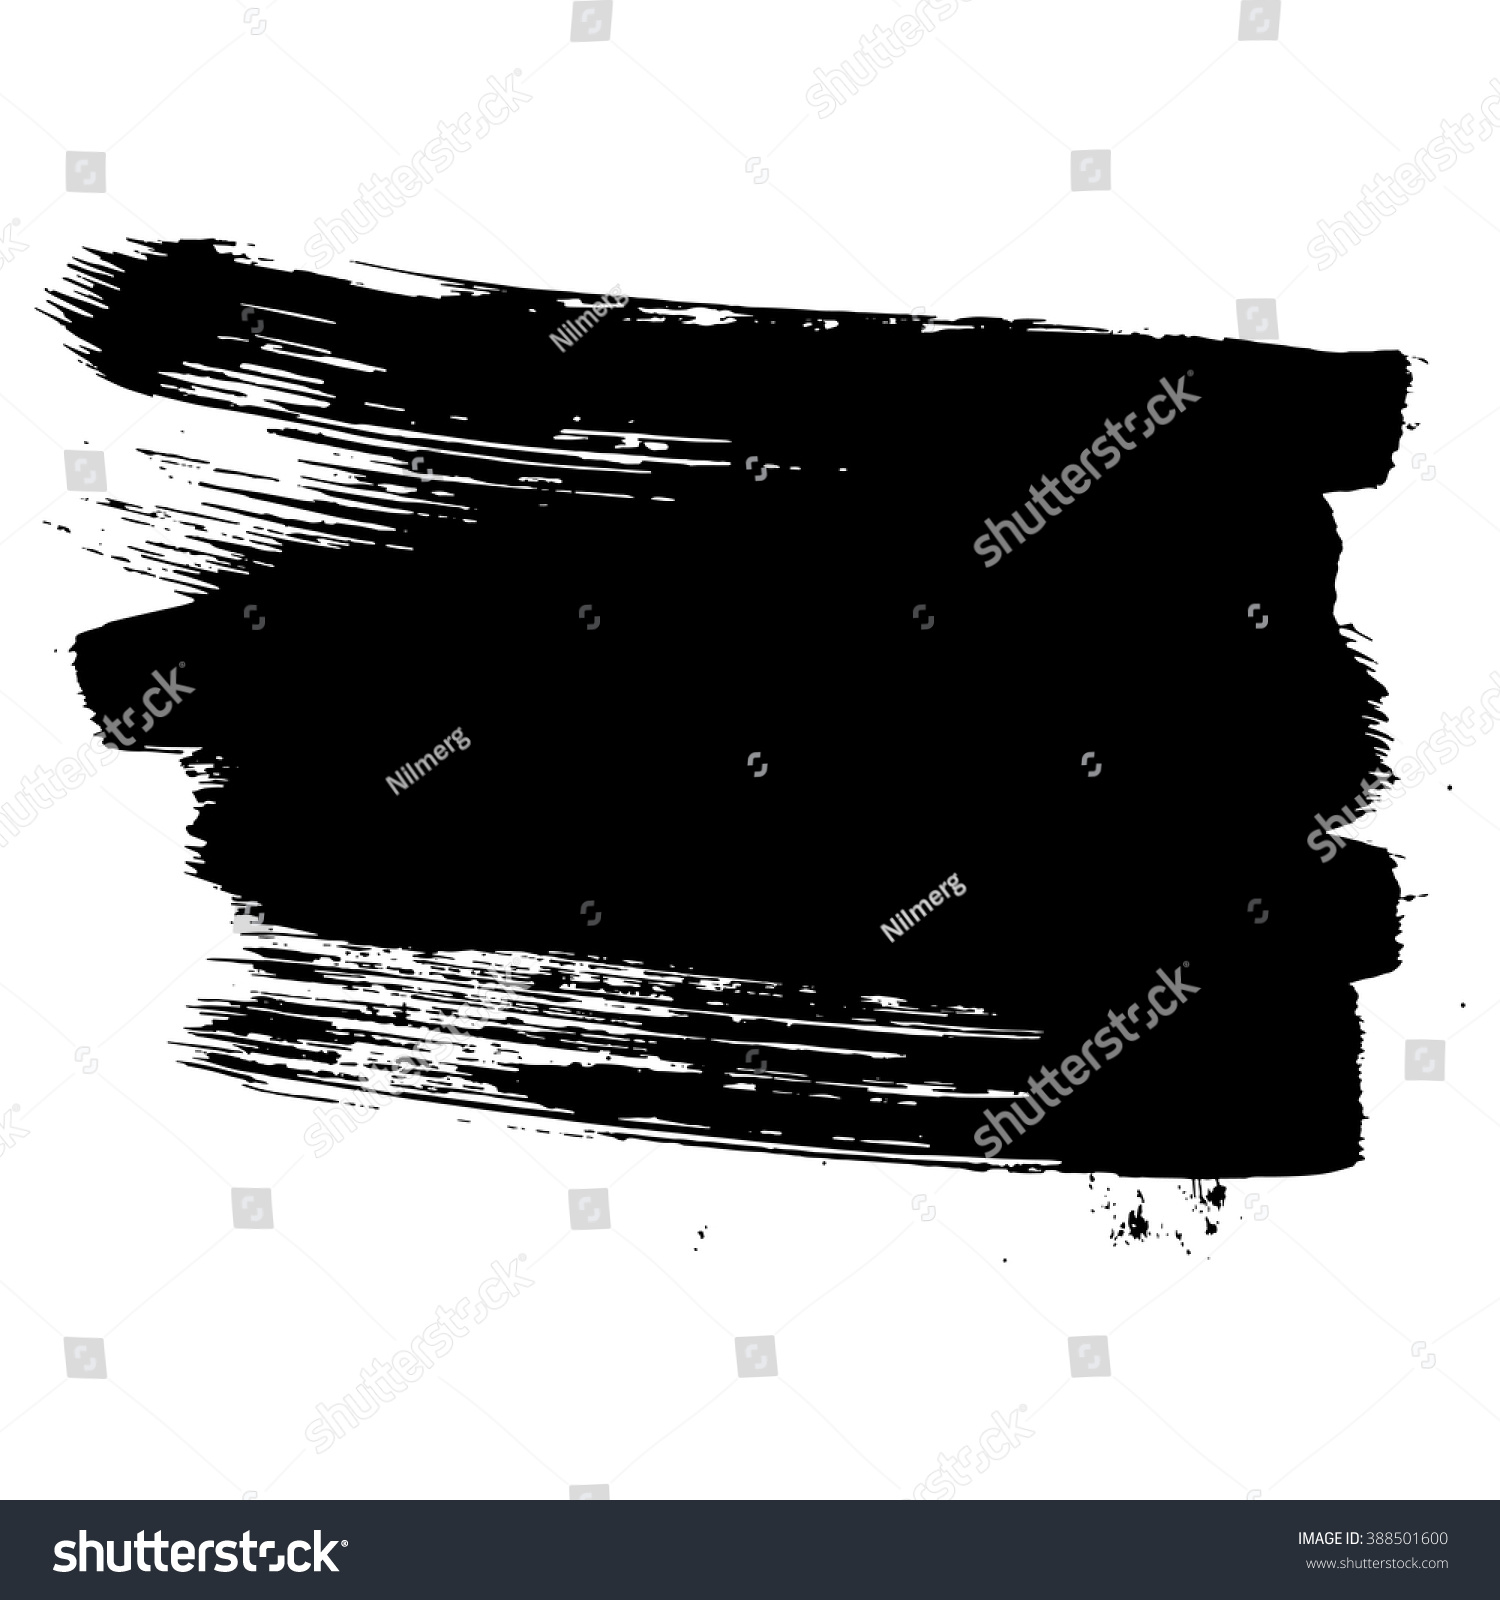 Grunge Black Abstract Textured Square Vector Stock Vector 388501600 ...